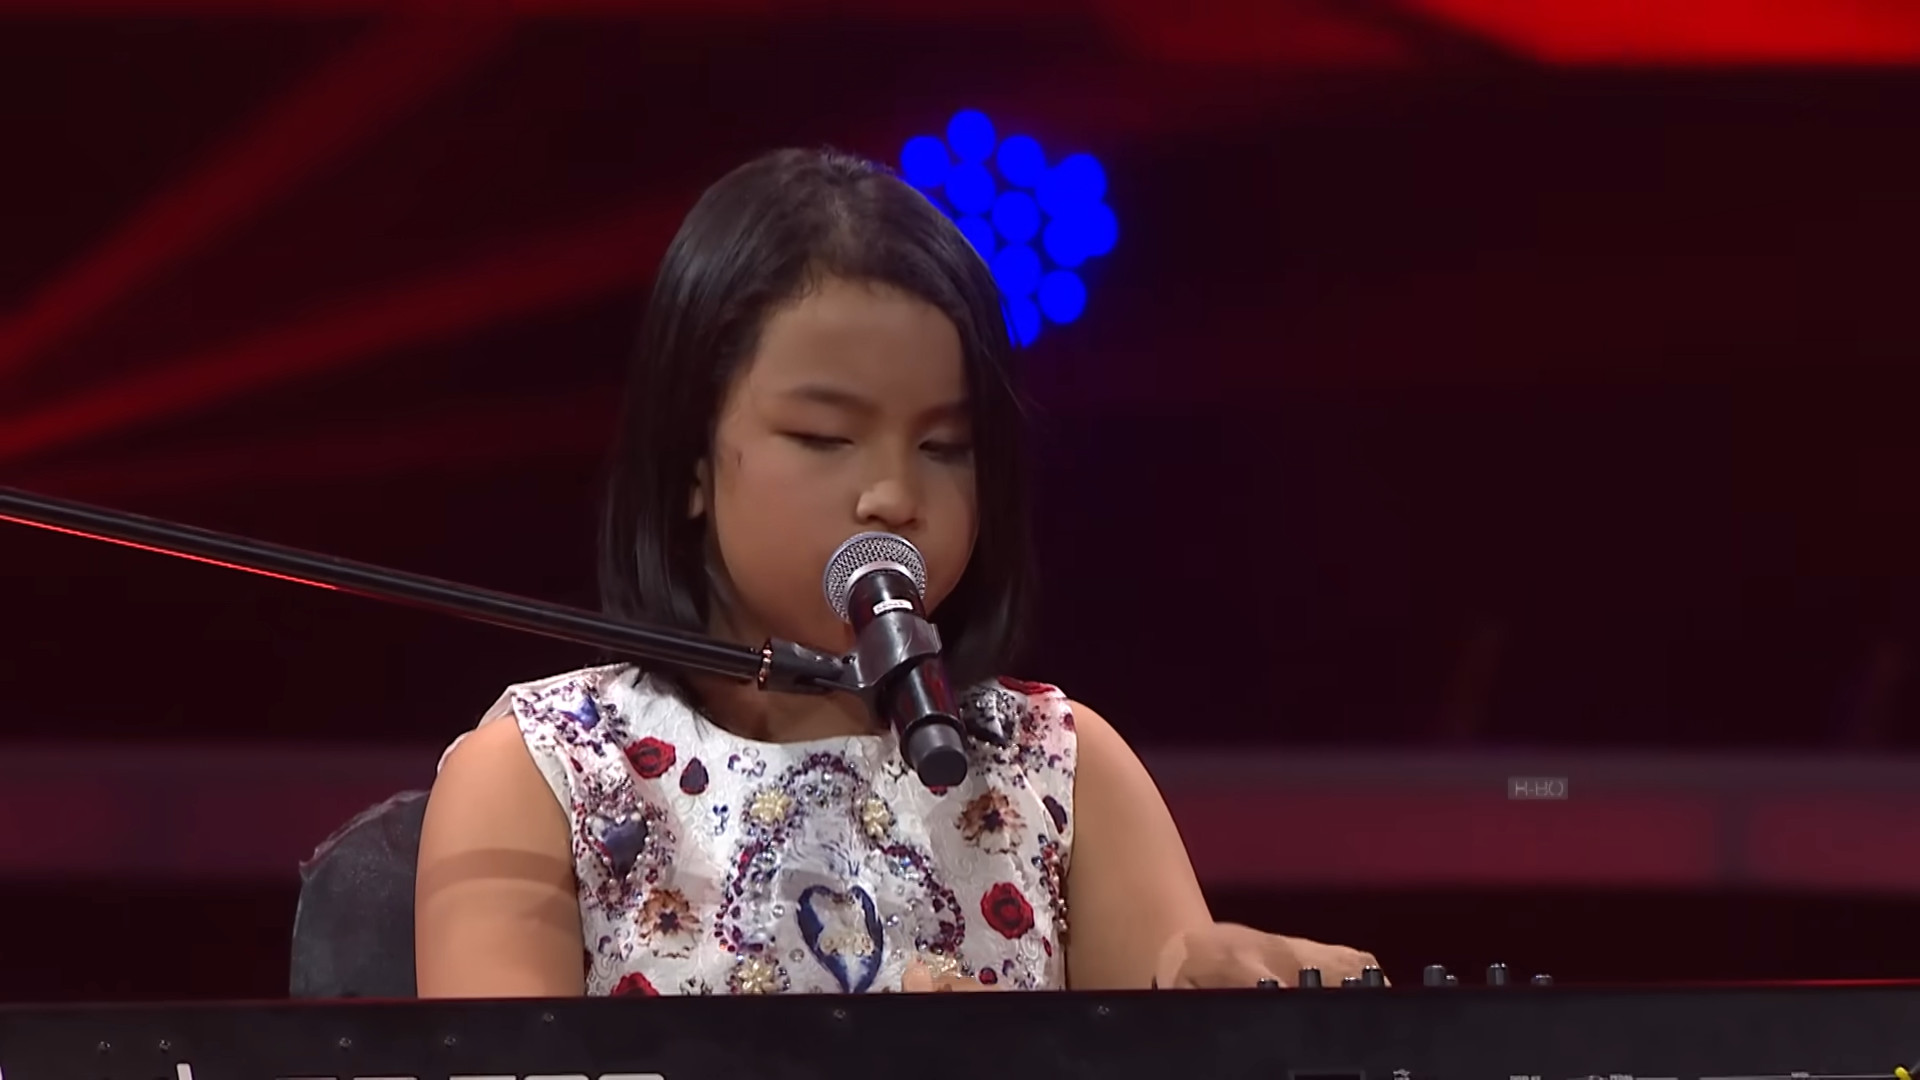 Putri Ariani 8 Fun Facts About The Indonesia Singer Who Received Simon Cowell’s Golden Buzzer